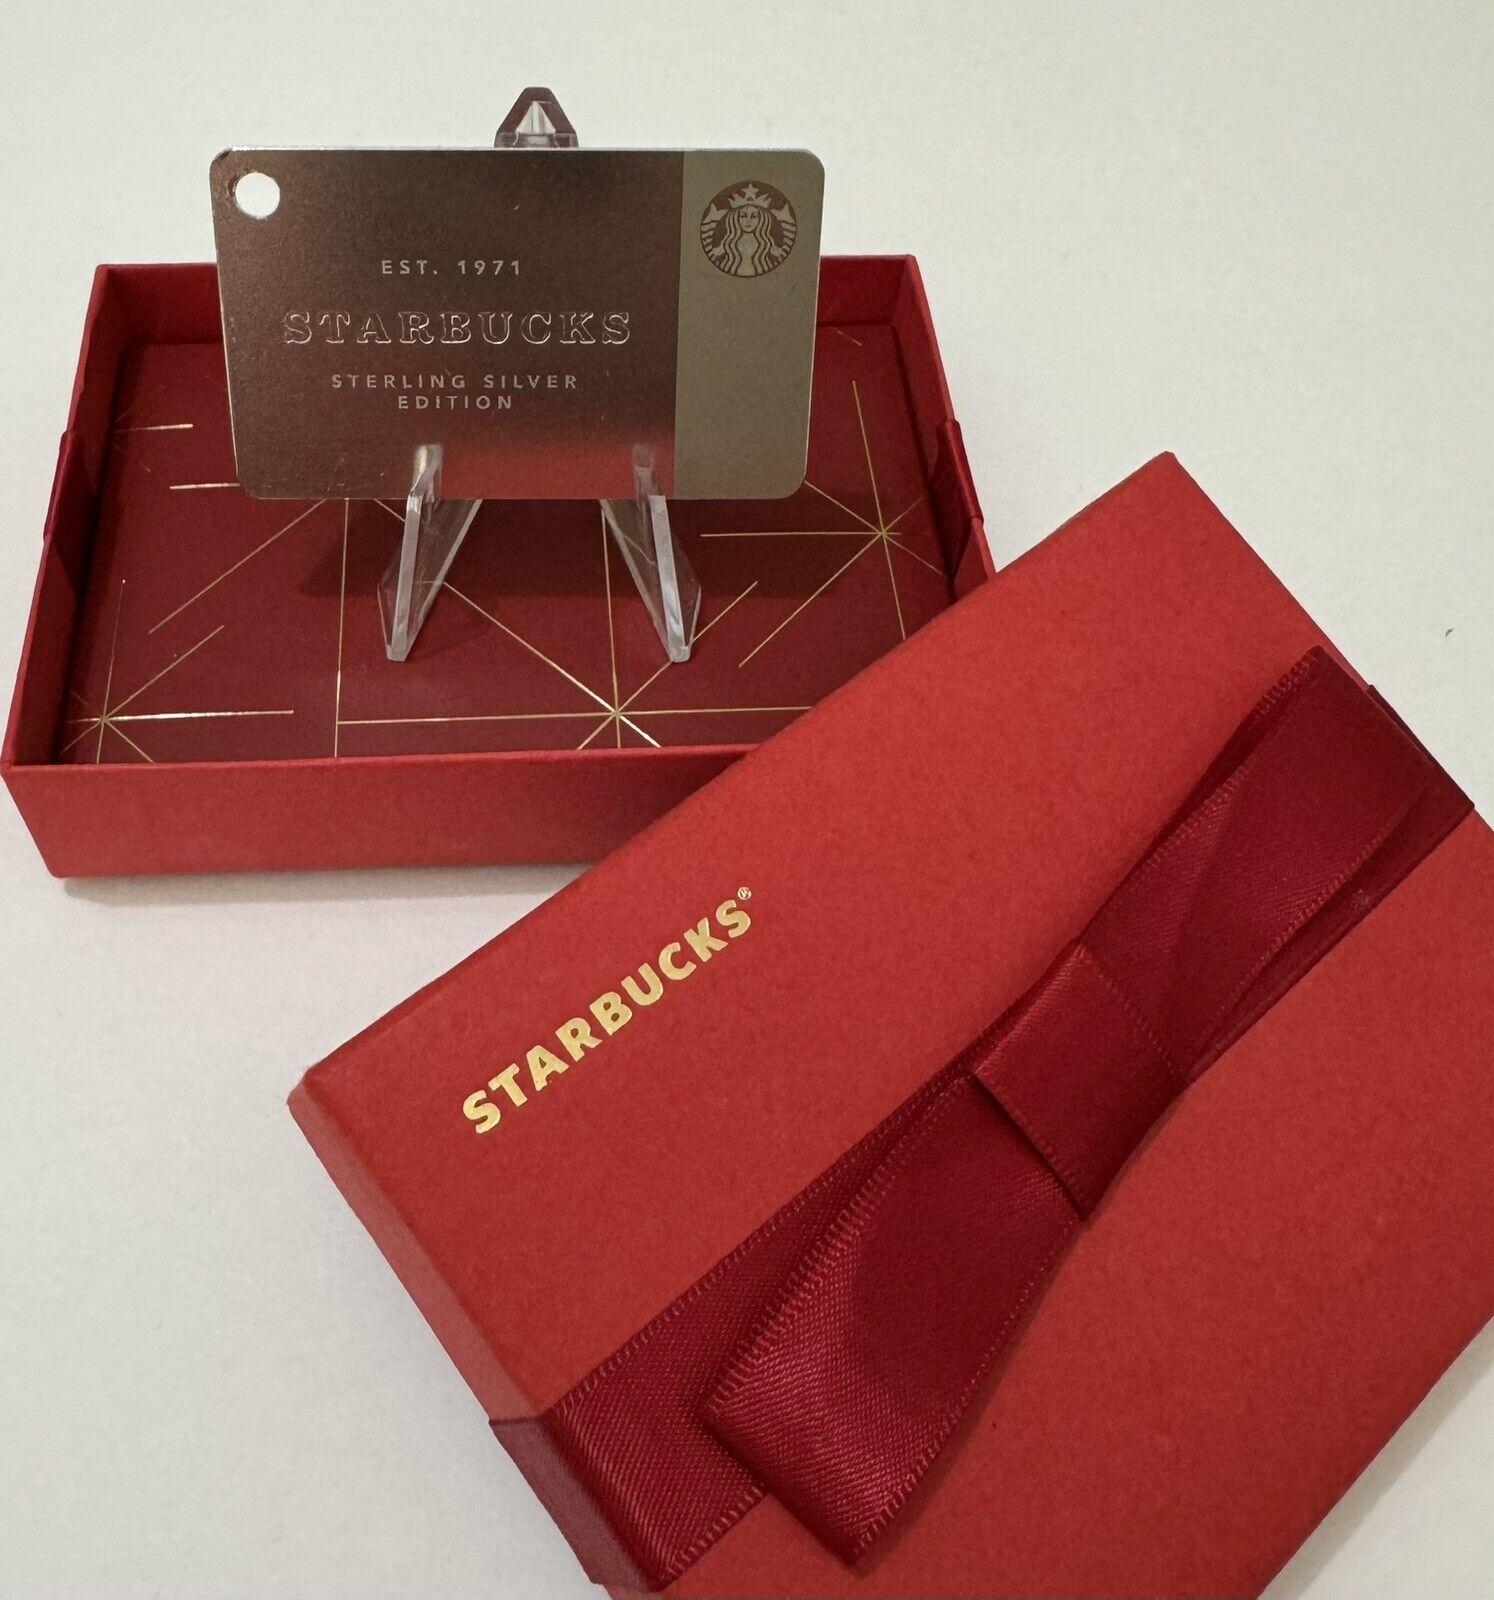 Starbucks Limited Edition 2014 Sterling Silver Key Chain Gift Card & Box